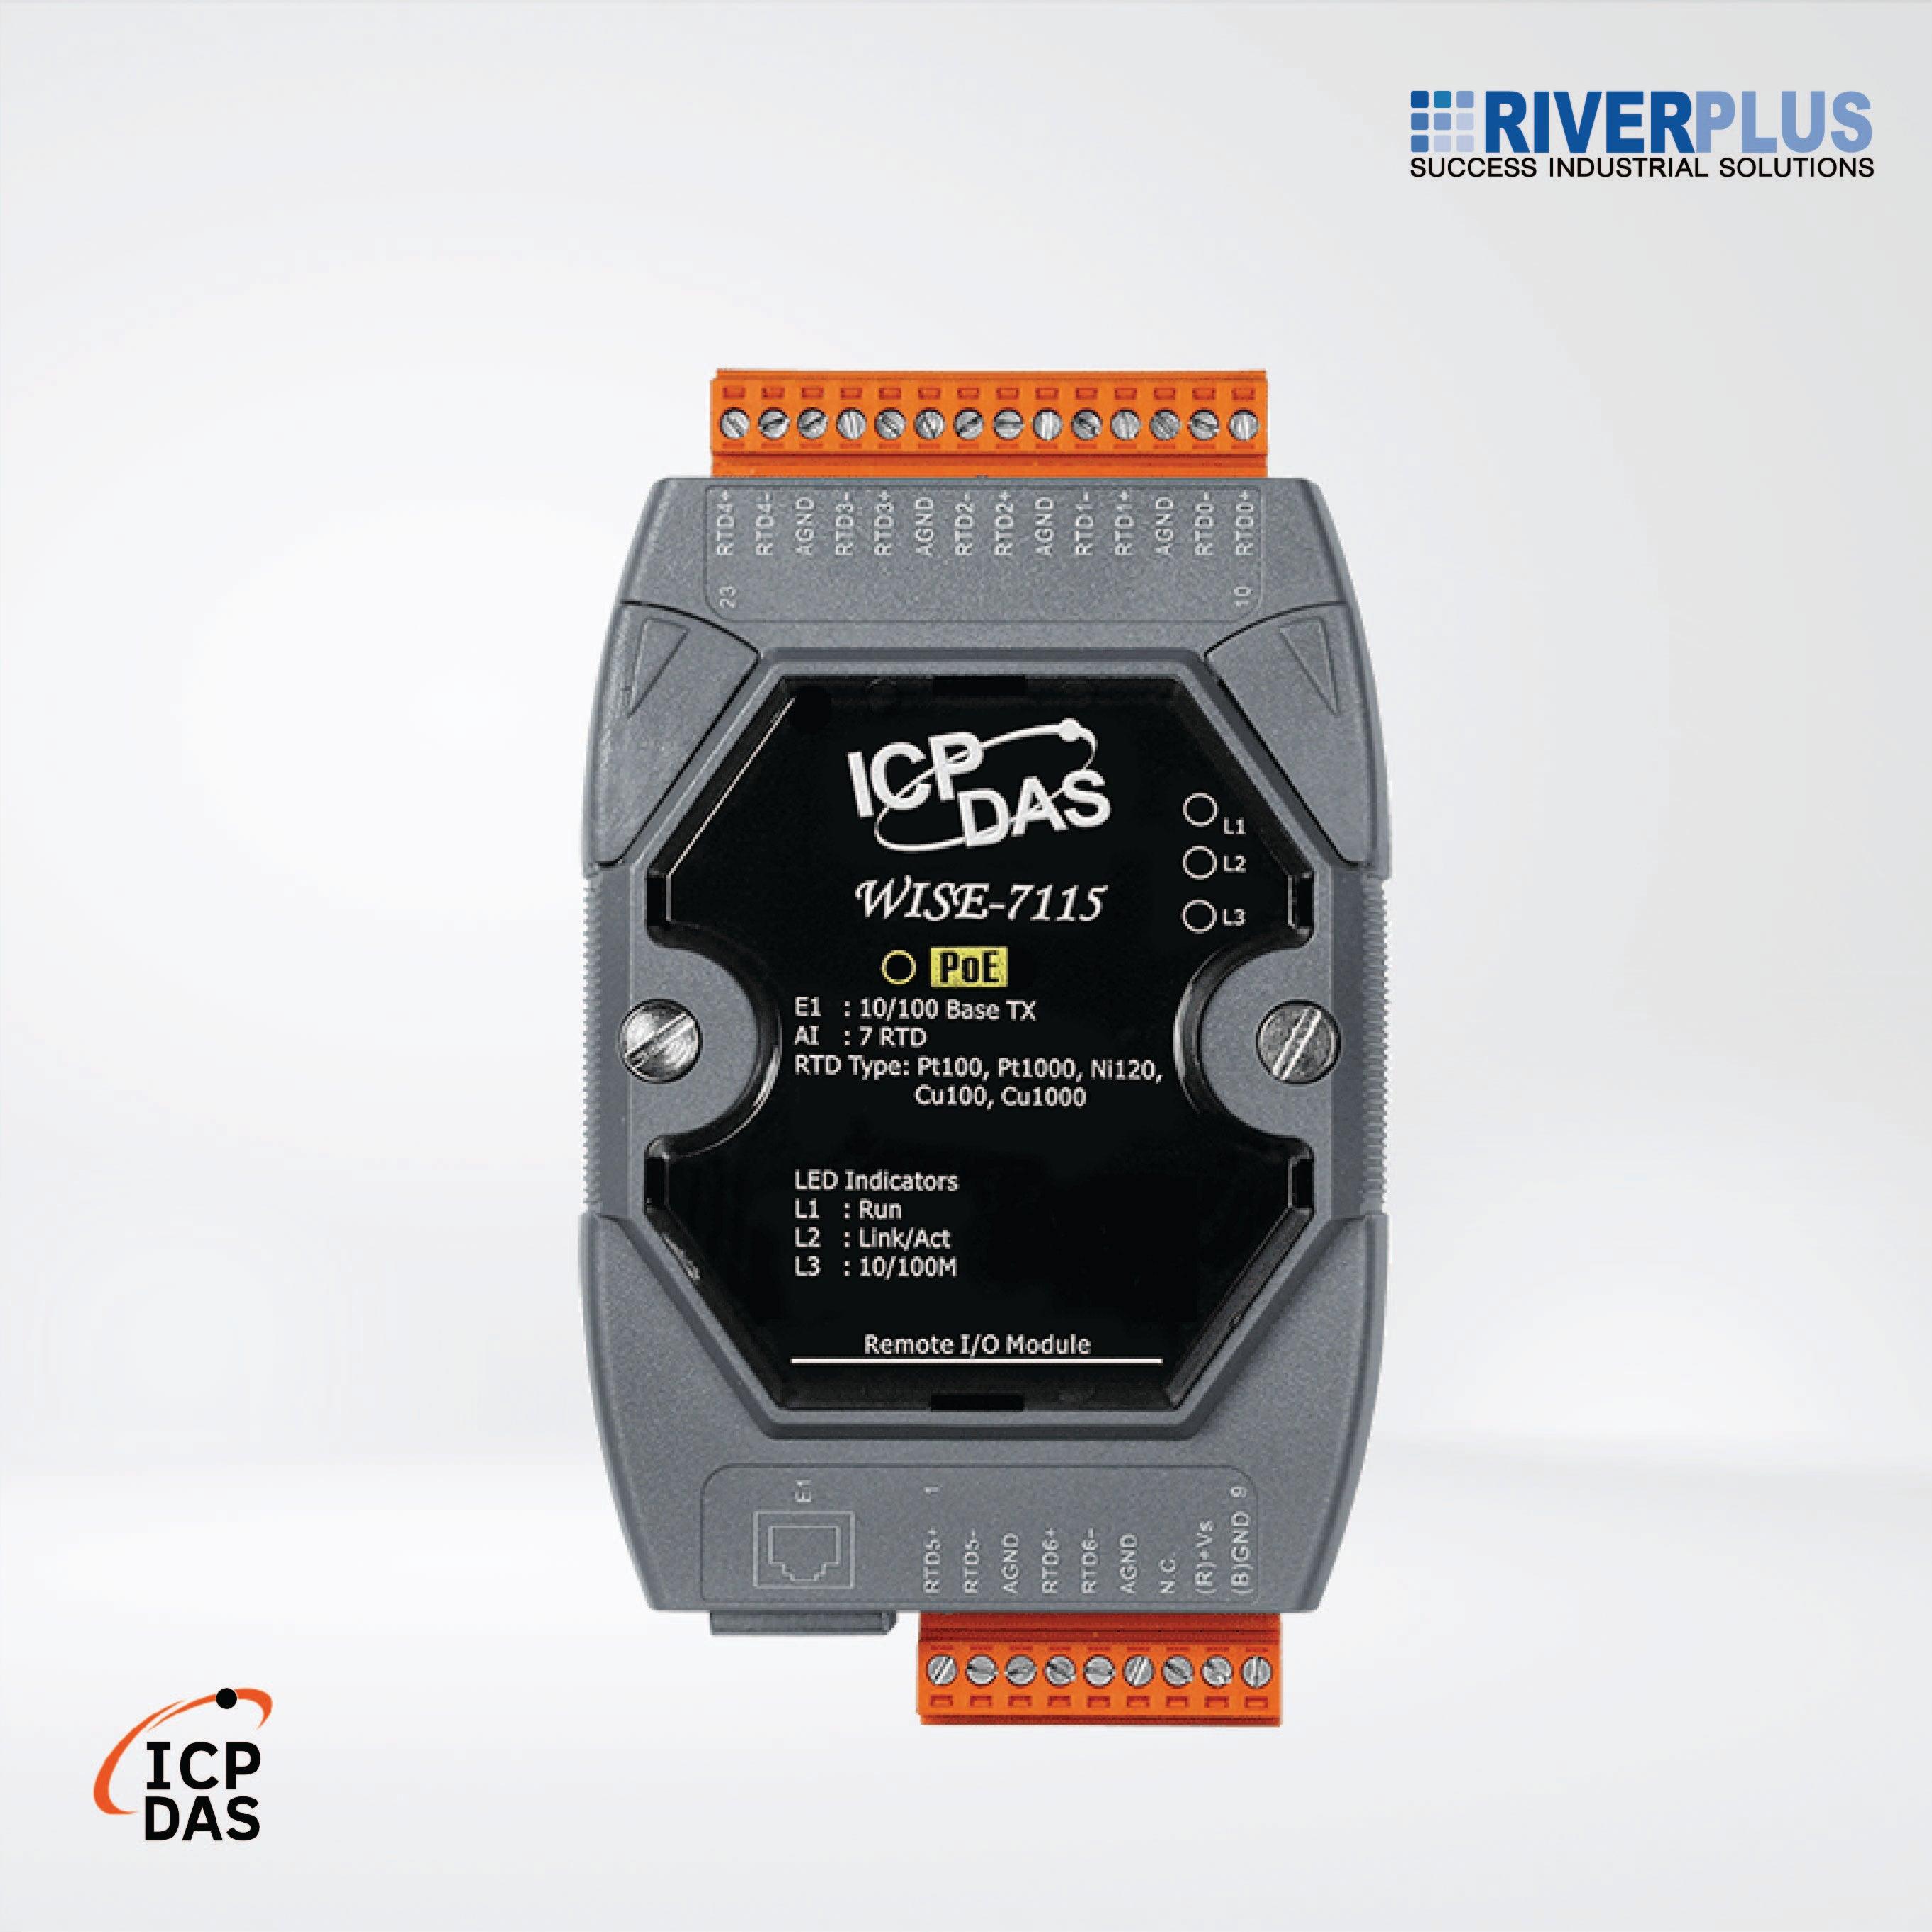 WISE-7115 Intelligent I/O Module with 7-channel RTD Input with 3-wire RTD Lead Resistance Elimination - Riverplus